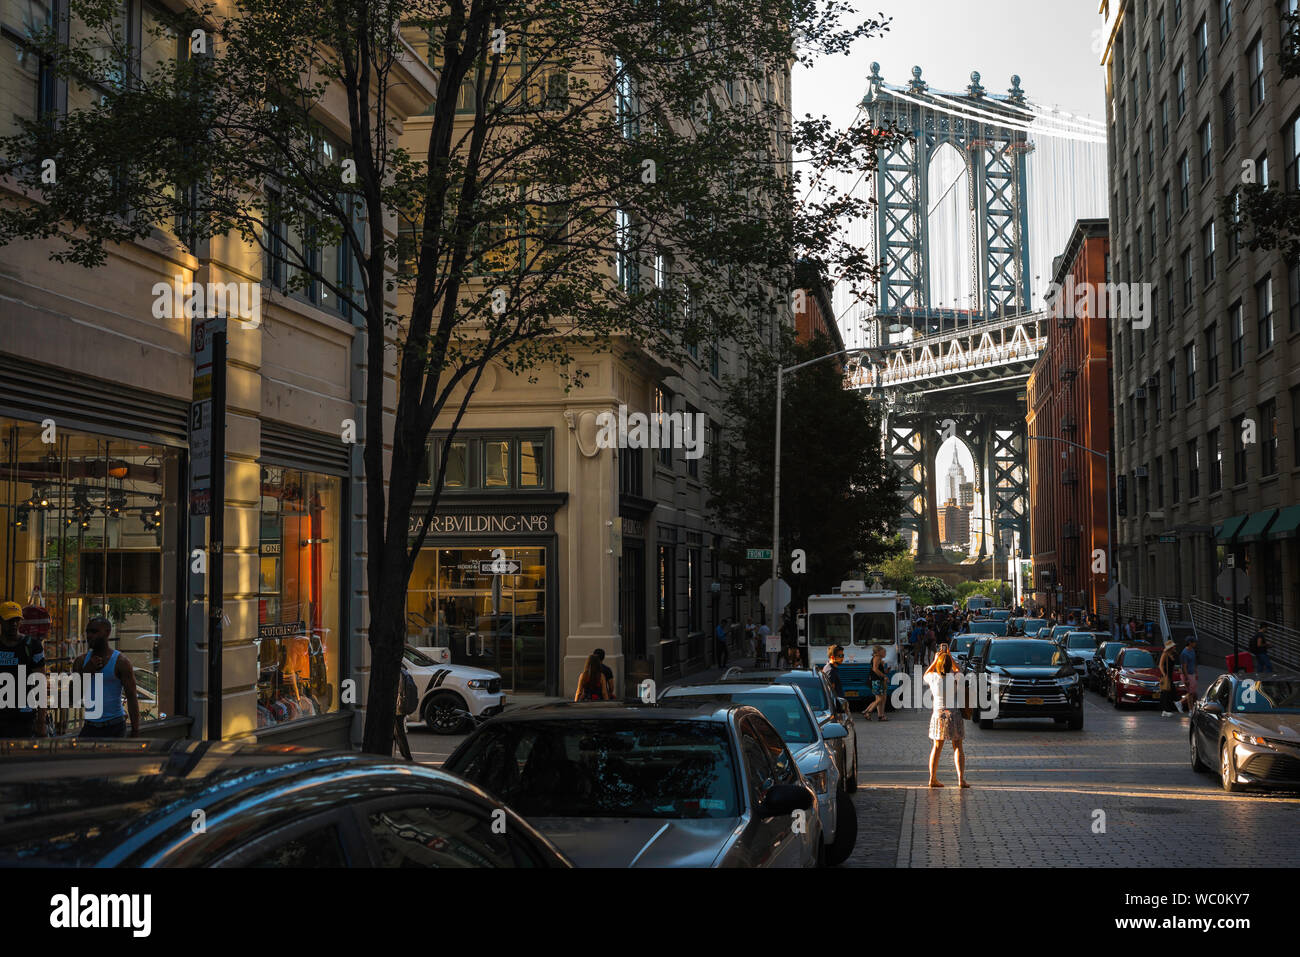 Dumbo New York, rear view of a woman taking a photo of the Manhattan Bridge in Washington Street in the Dumbo area of Brooklyn, New York City, USA. Stock Photo